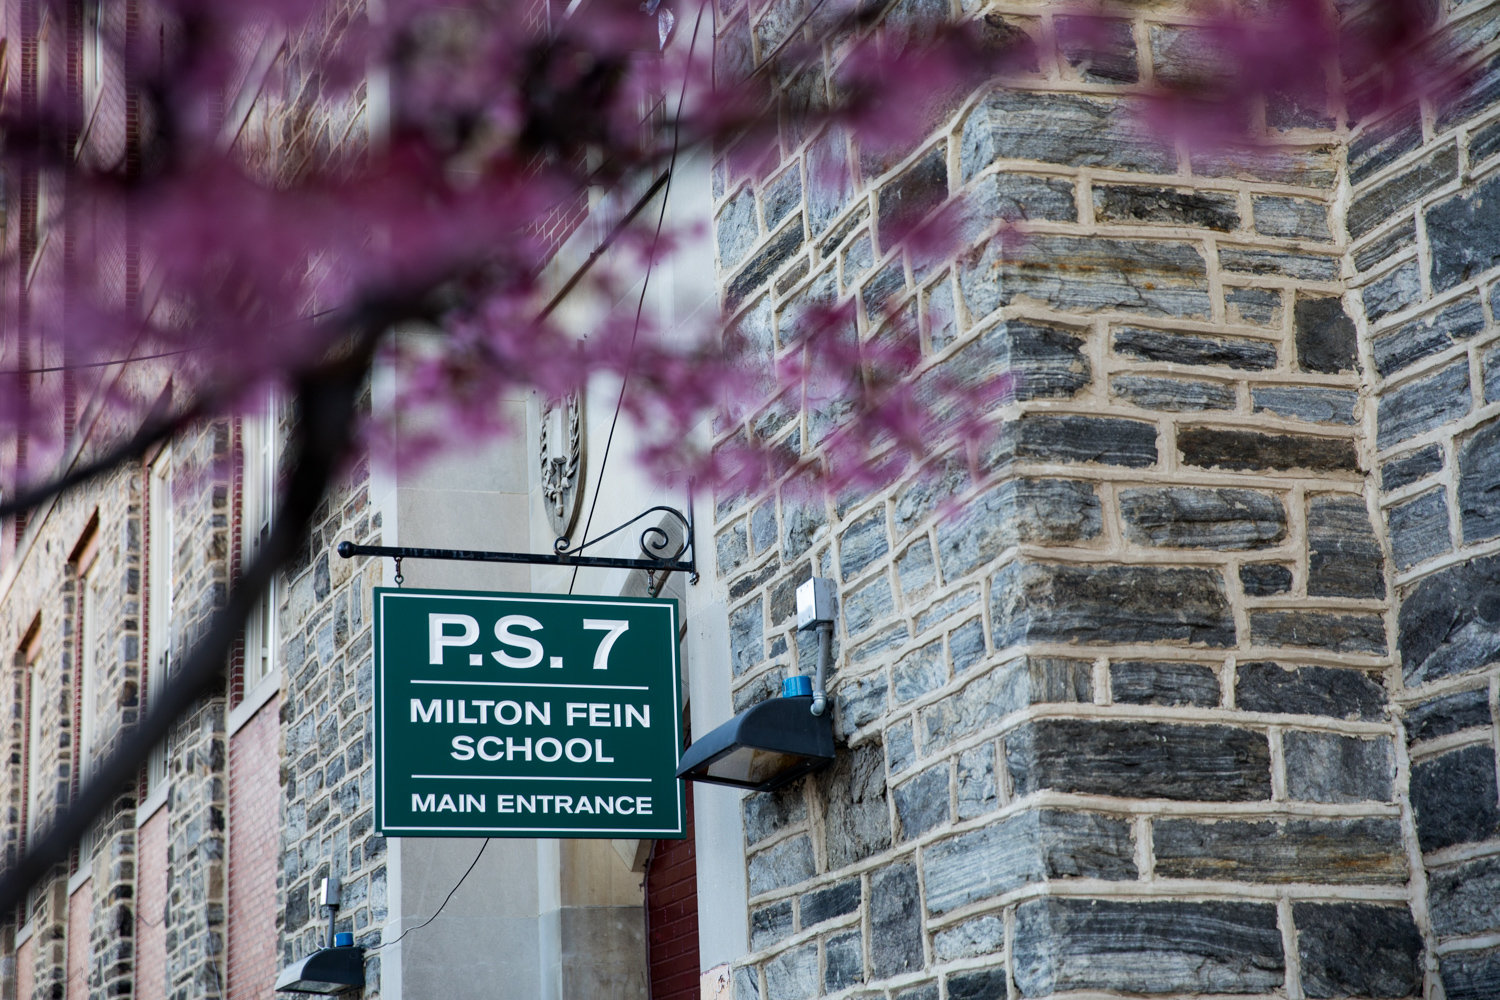 P.S. 7 Milton Fein School is one among many school closures citywide following a press conference by Mayor Bill de Blasio, closures that are expected to last at least until April 20.